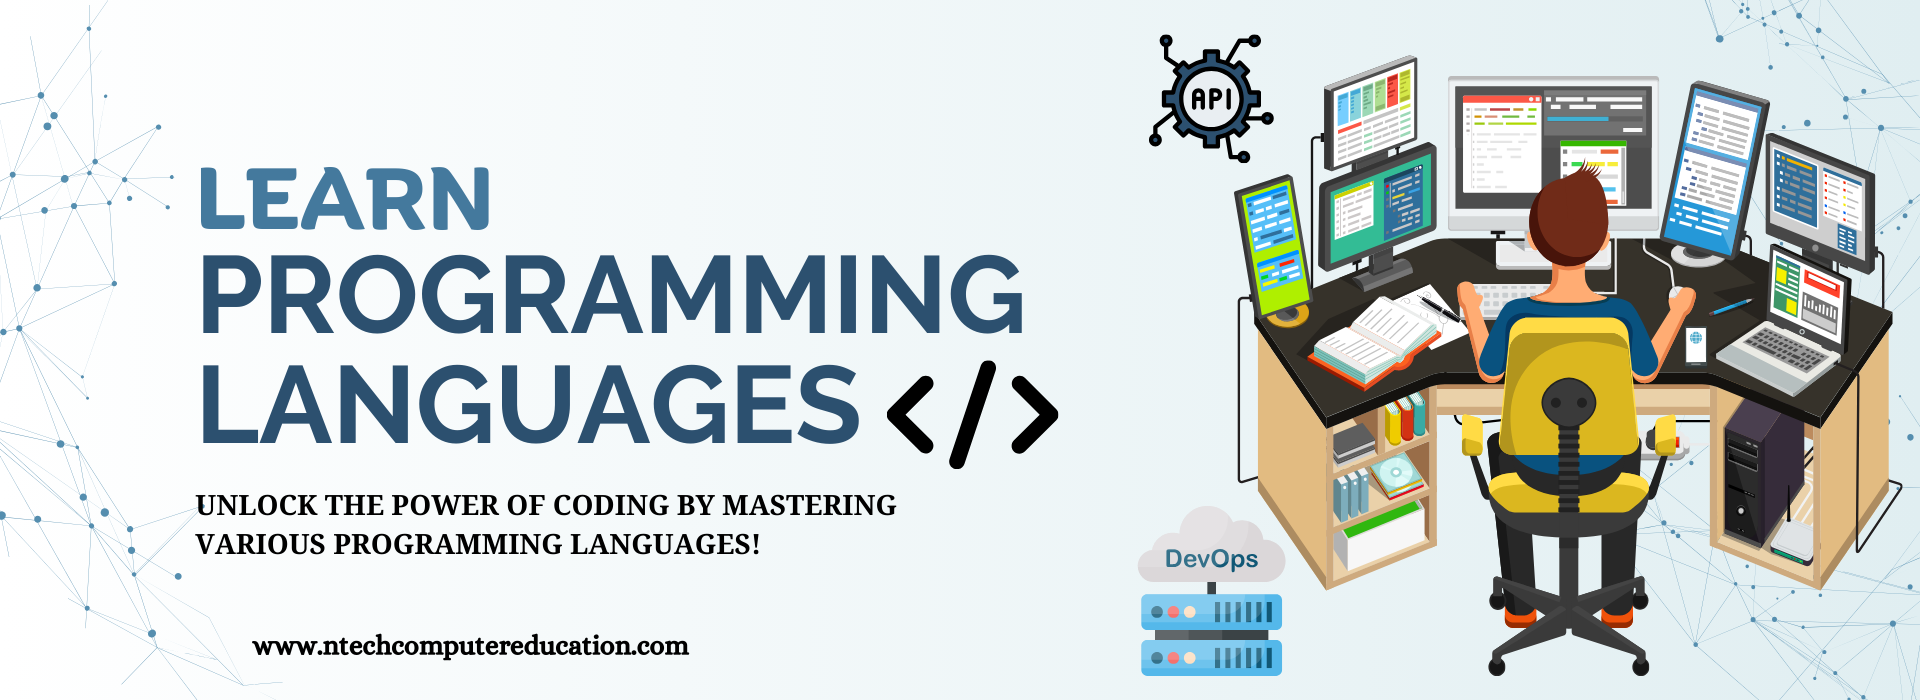 learn programming languages in ludhiana